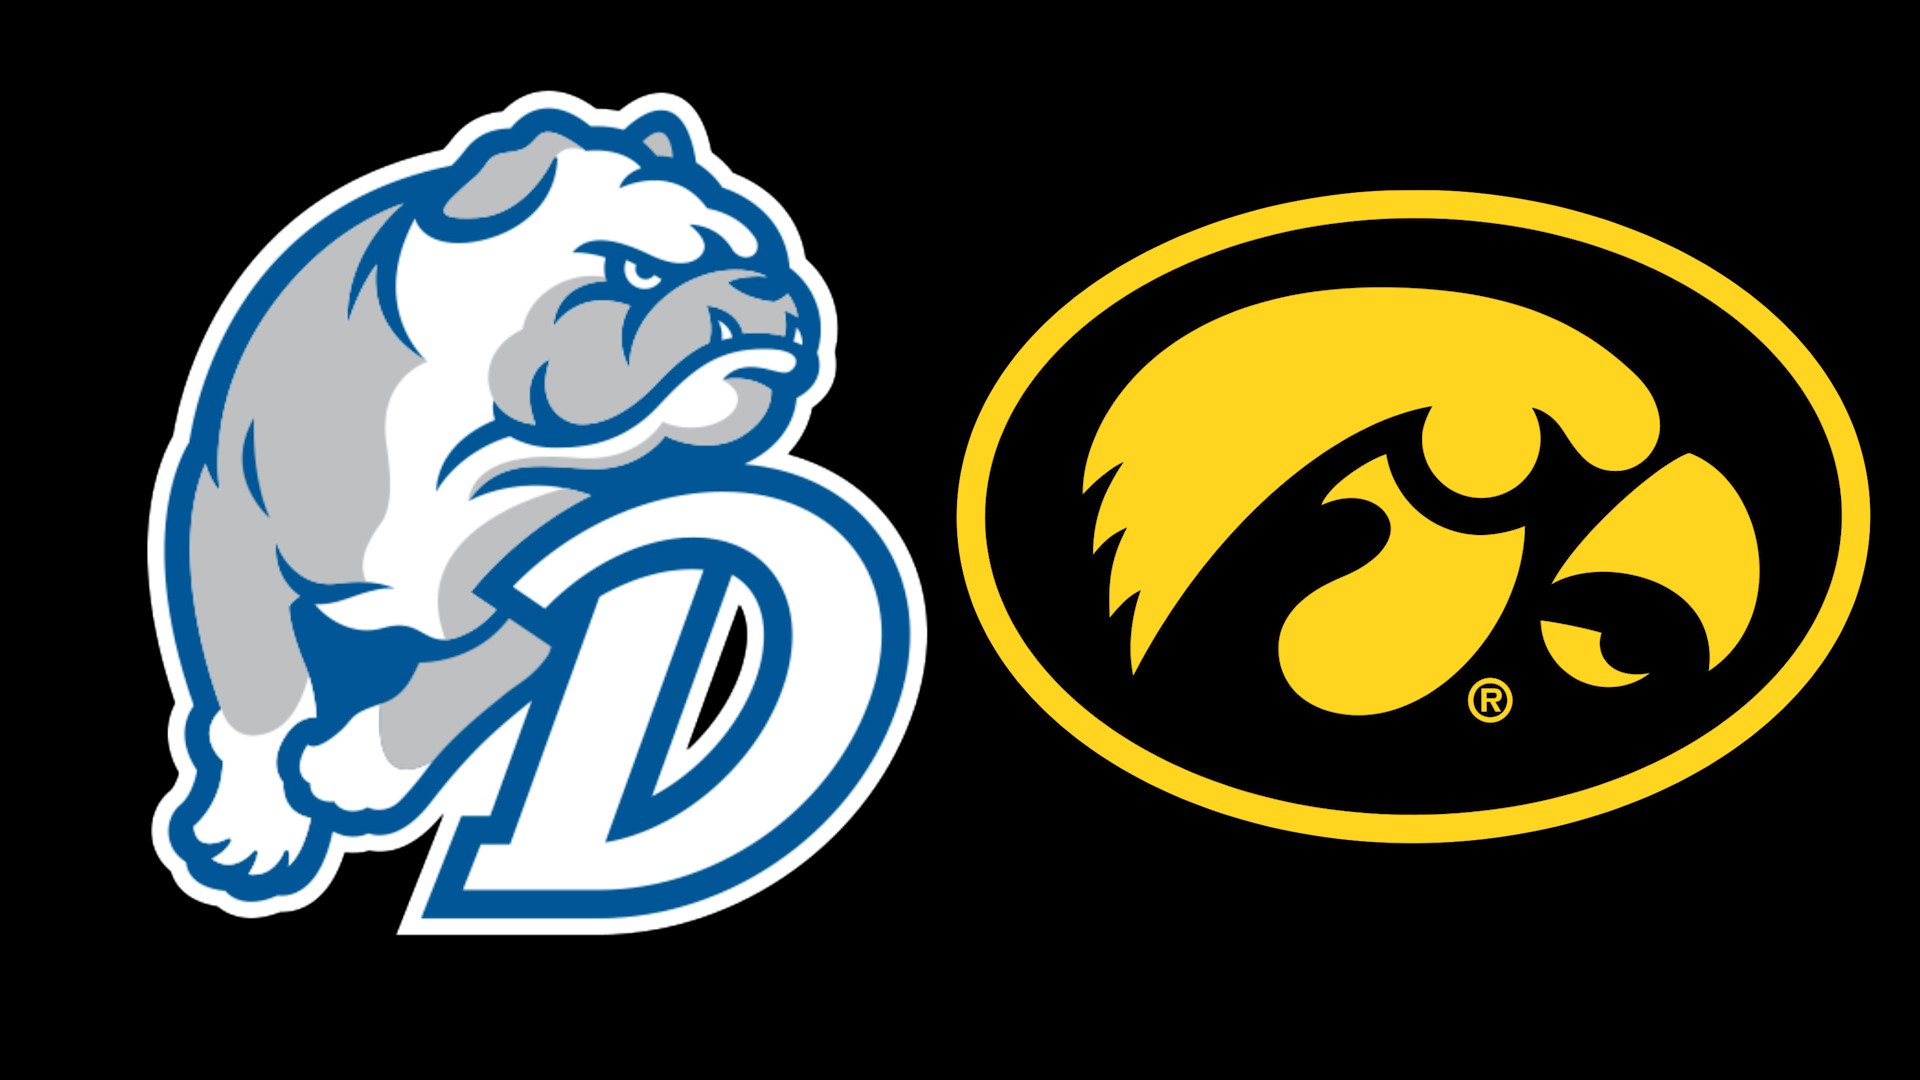 We are less than a month from Selection Sunday and Jon gives a brief look at where the Hawkeyes and Bulldogs are sitting in this Bracket Breakdown